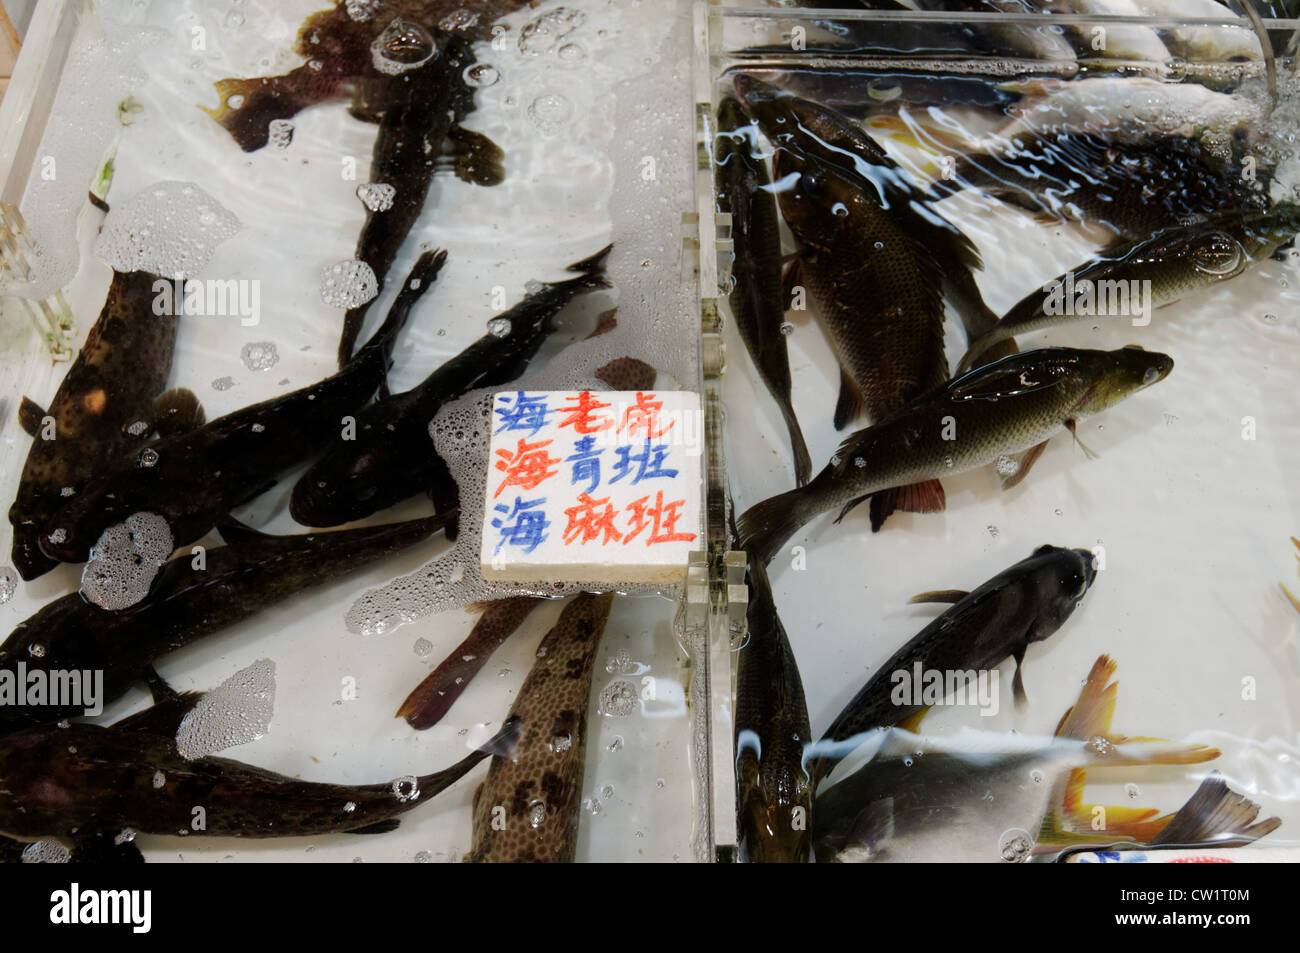 Live fish for sale in a Hong Kong market Stock Photo